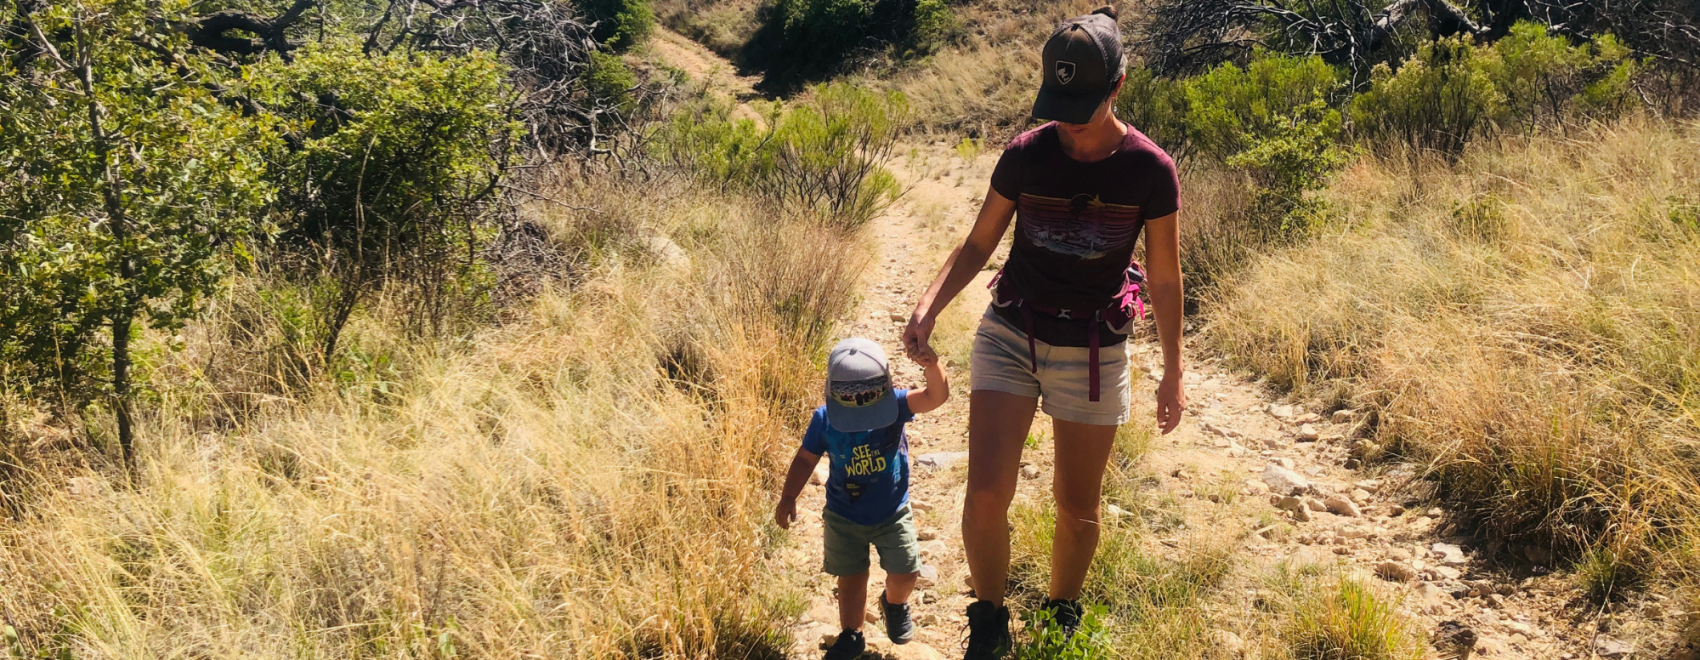 Tips for Hiking With Kids